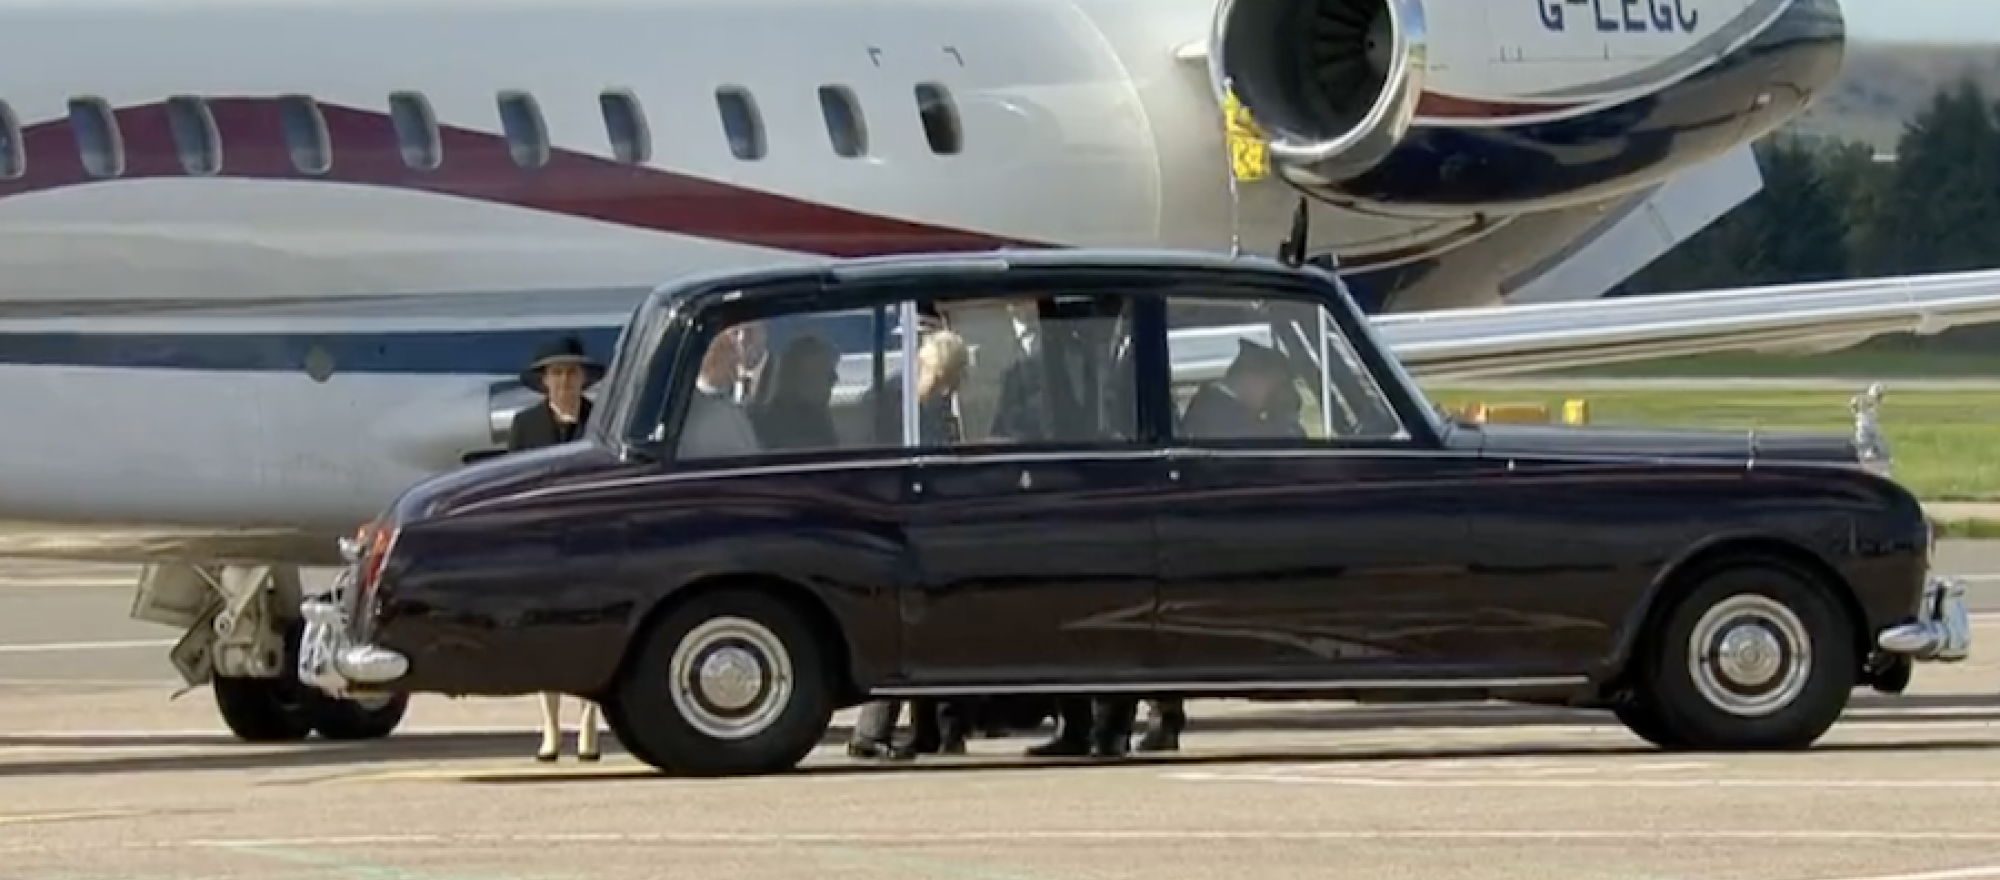 The UK's King Charles III arrived in Edinburgh in a Legacy 600 aircraft.